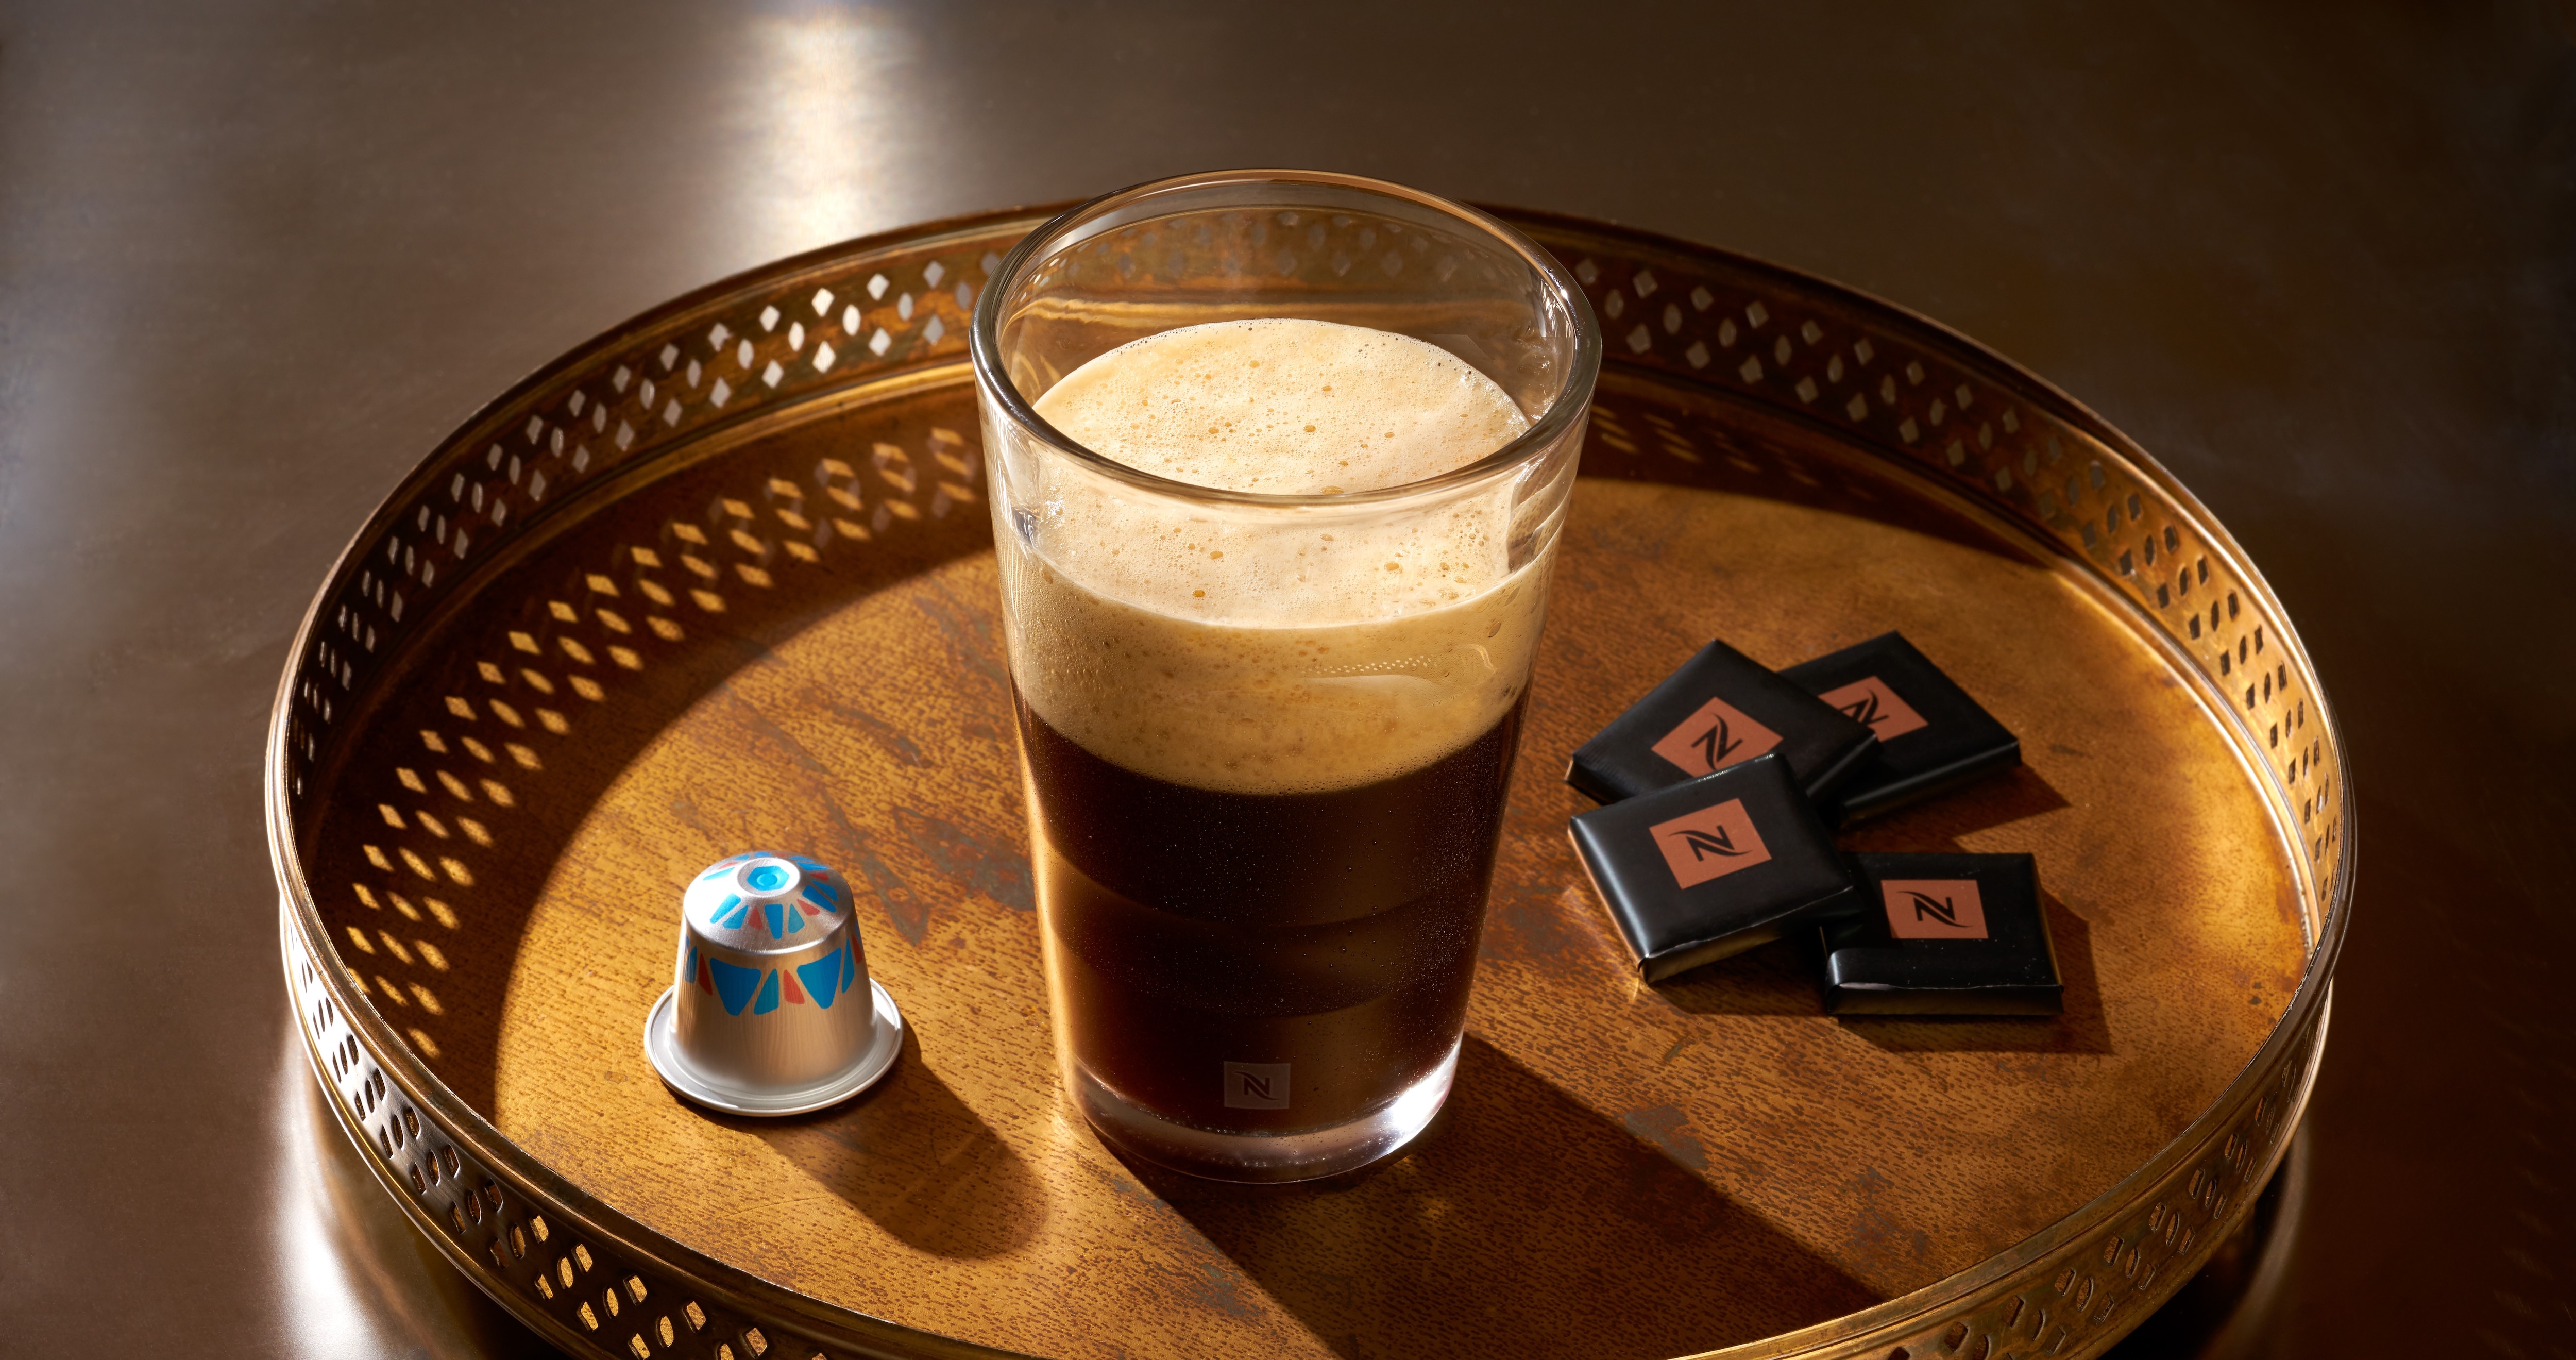 Nespresso Limited Edition Barista 20 oz Drink Cocktail Iced Coffee Shaker